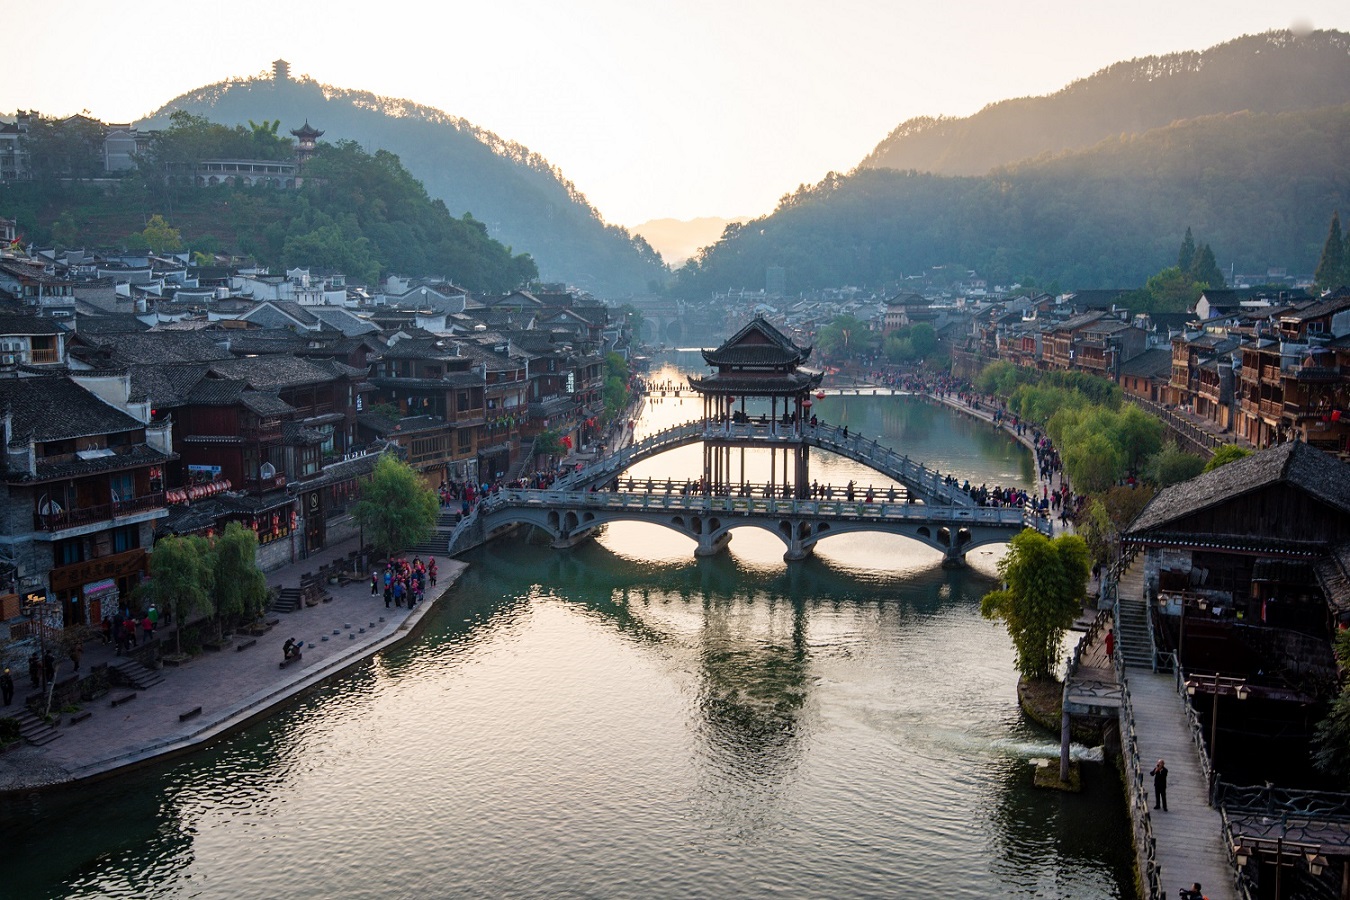 Hunan Province, China, Debuts Digital Yuan Loans for Small Businesses – Another CBDC First?